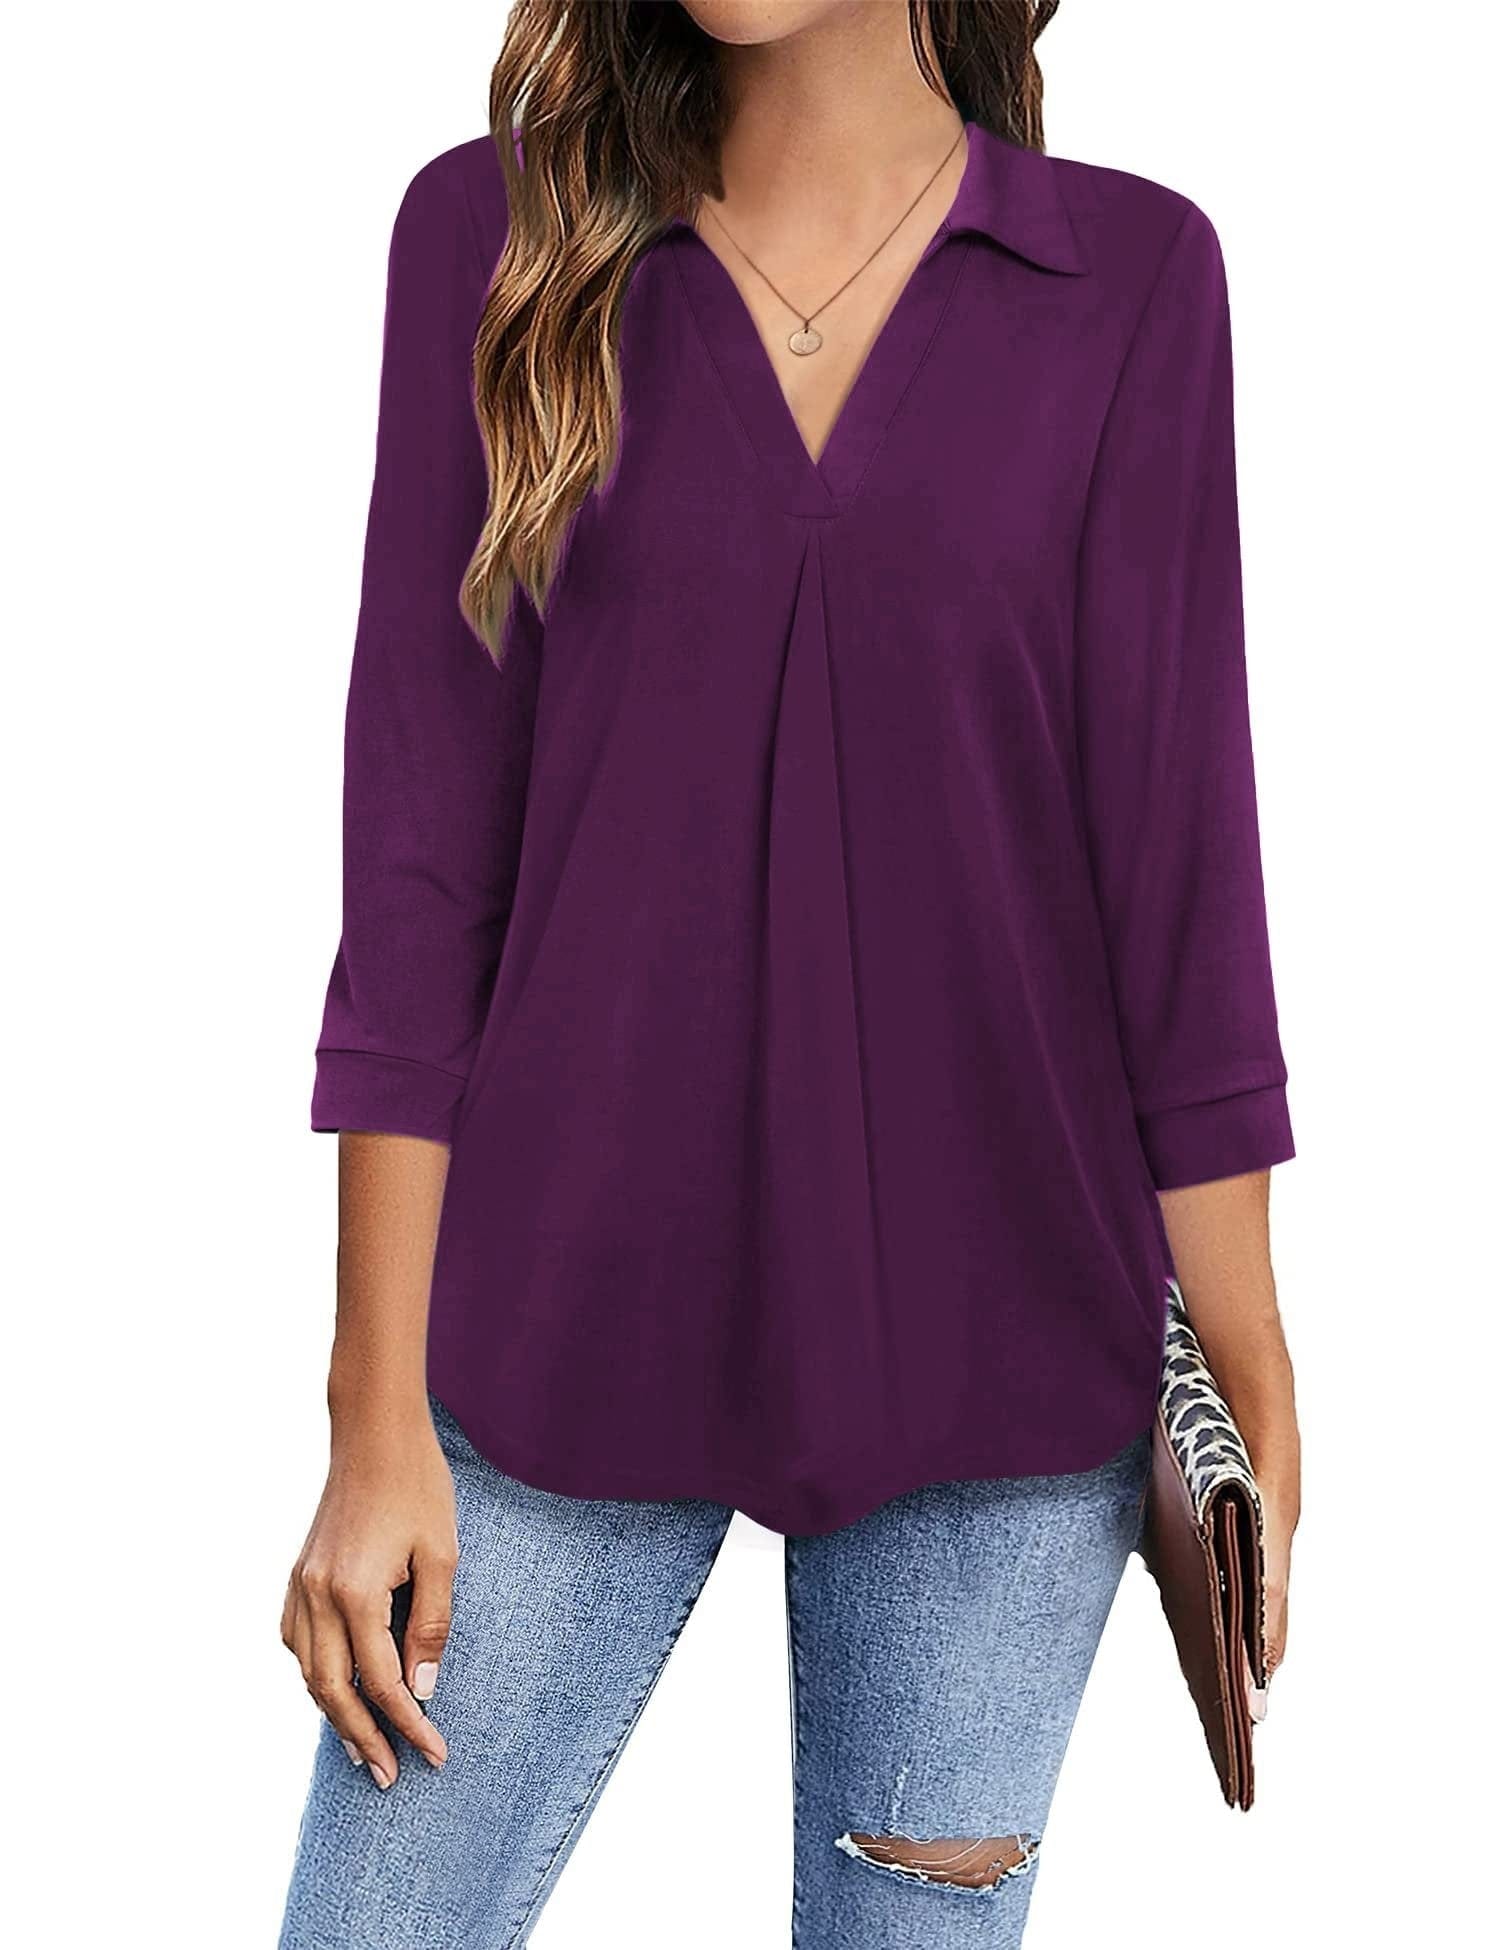 Collared V Neck Casual Loose Blouse BLO2211191918PURS Purple / 2 (S)